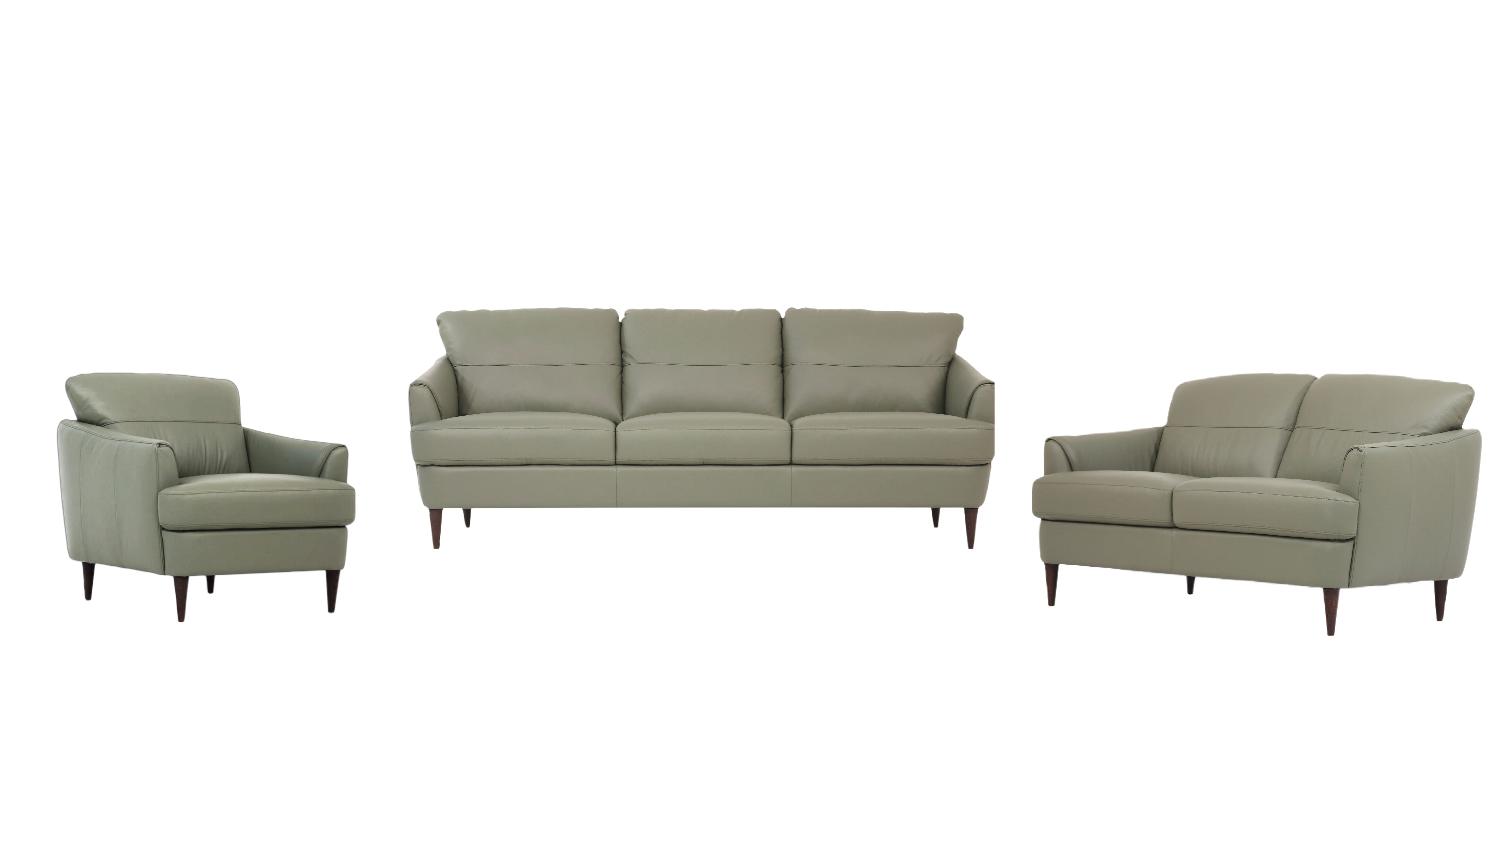 Contemporary Sofa Loveseat and Chair Set Helena 54570-3pcs in Moss Leather